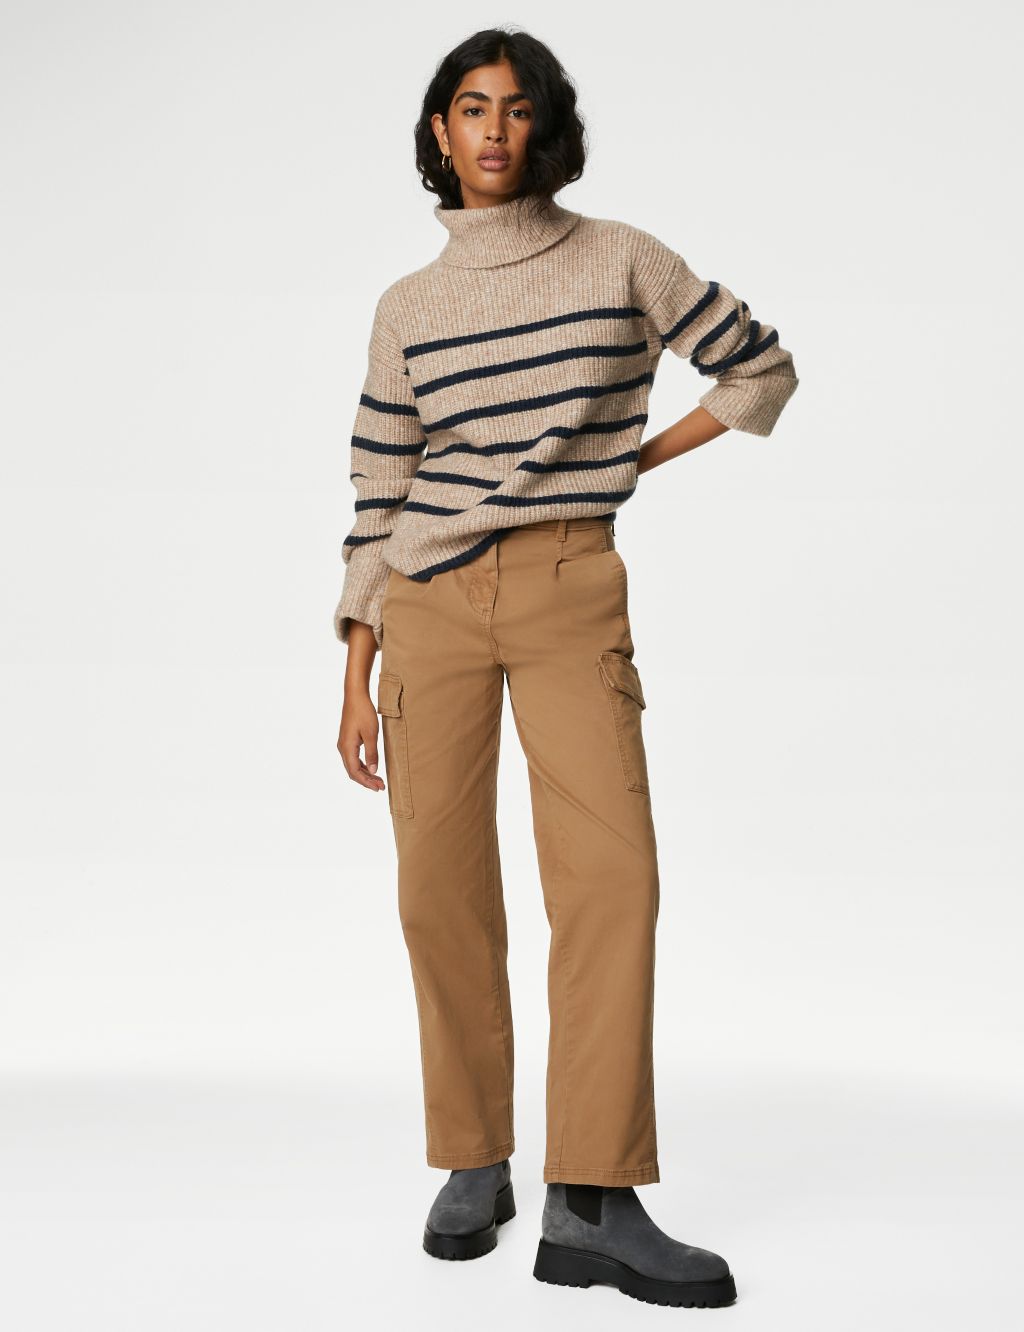 Recycled Blend Striped Roll Neck Jumper image 3